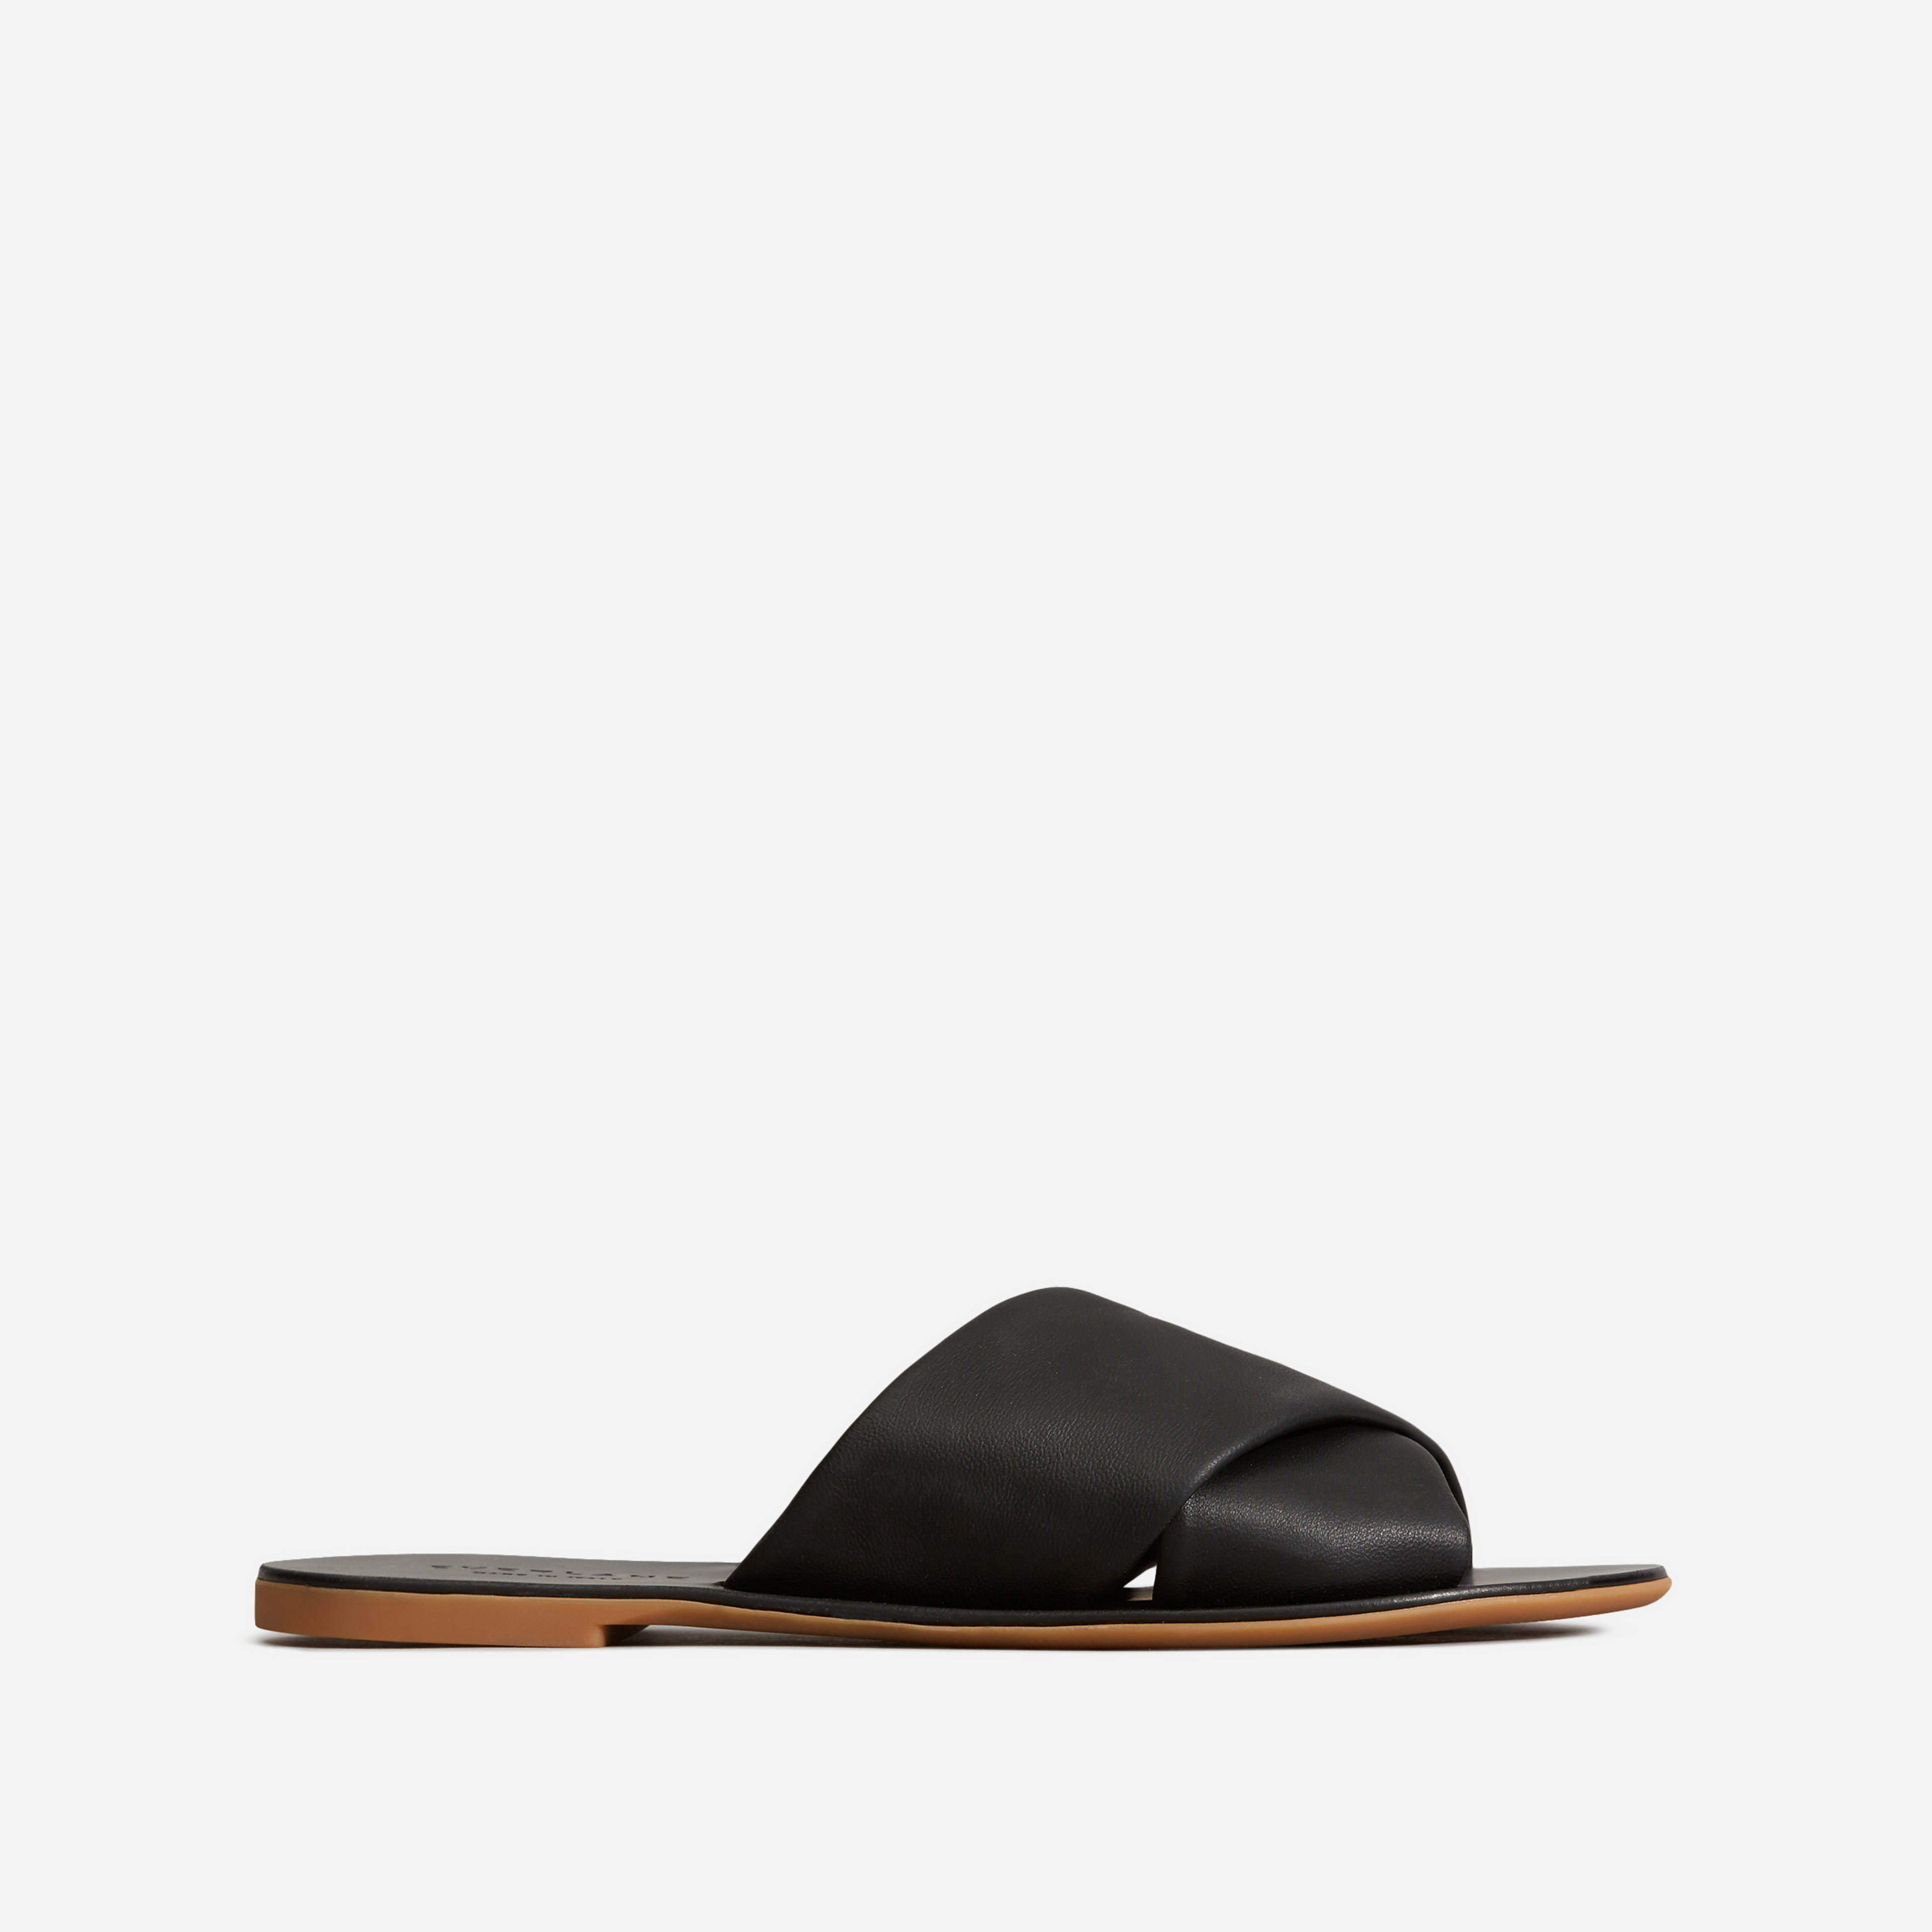 The Day Crossover Sandal, All Skus